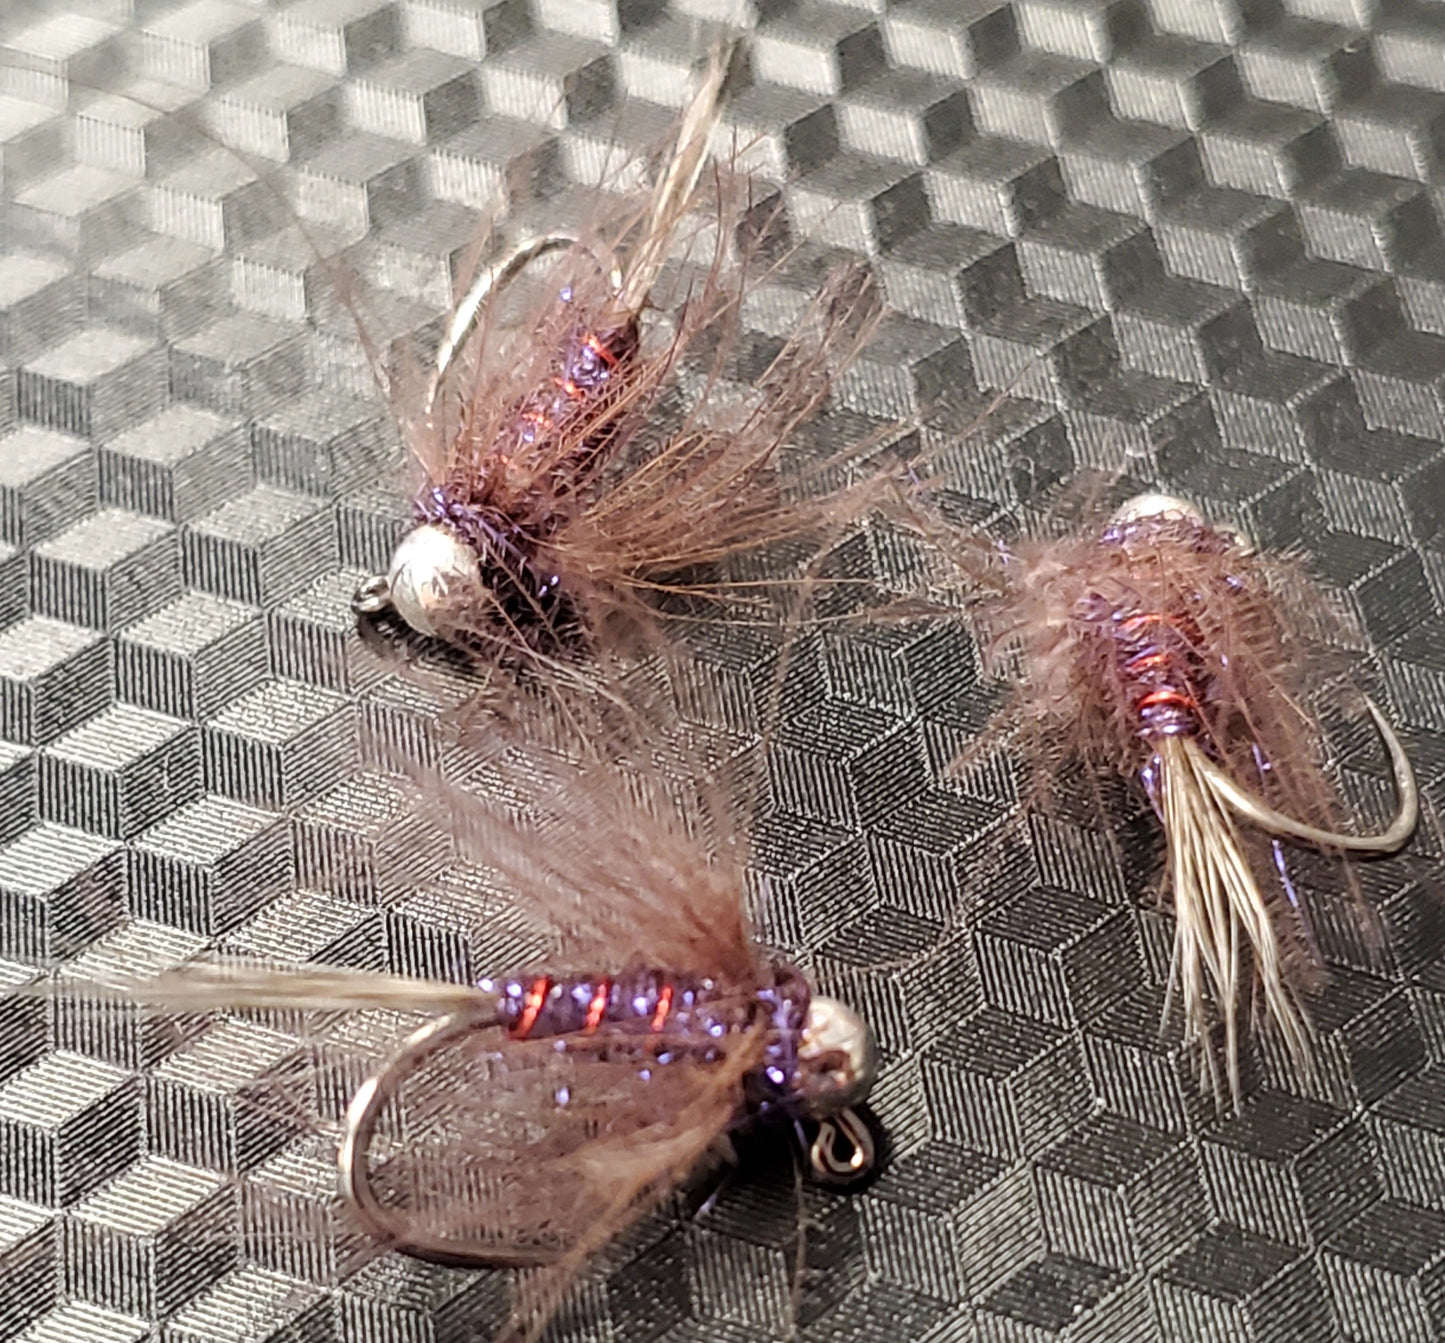 Duracell Jig Fly #16, Tungsten Bead Head Jig Fly, Duracell Trout Fly, BH Nymph